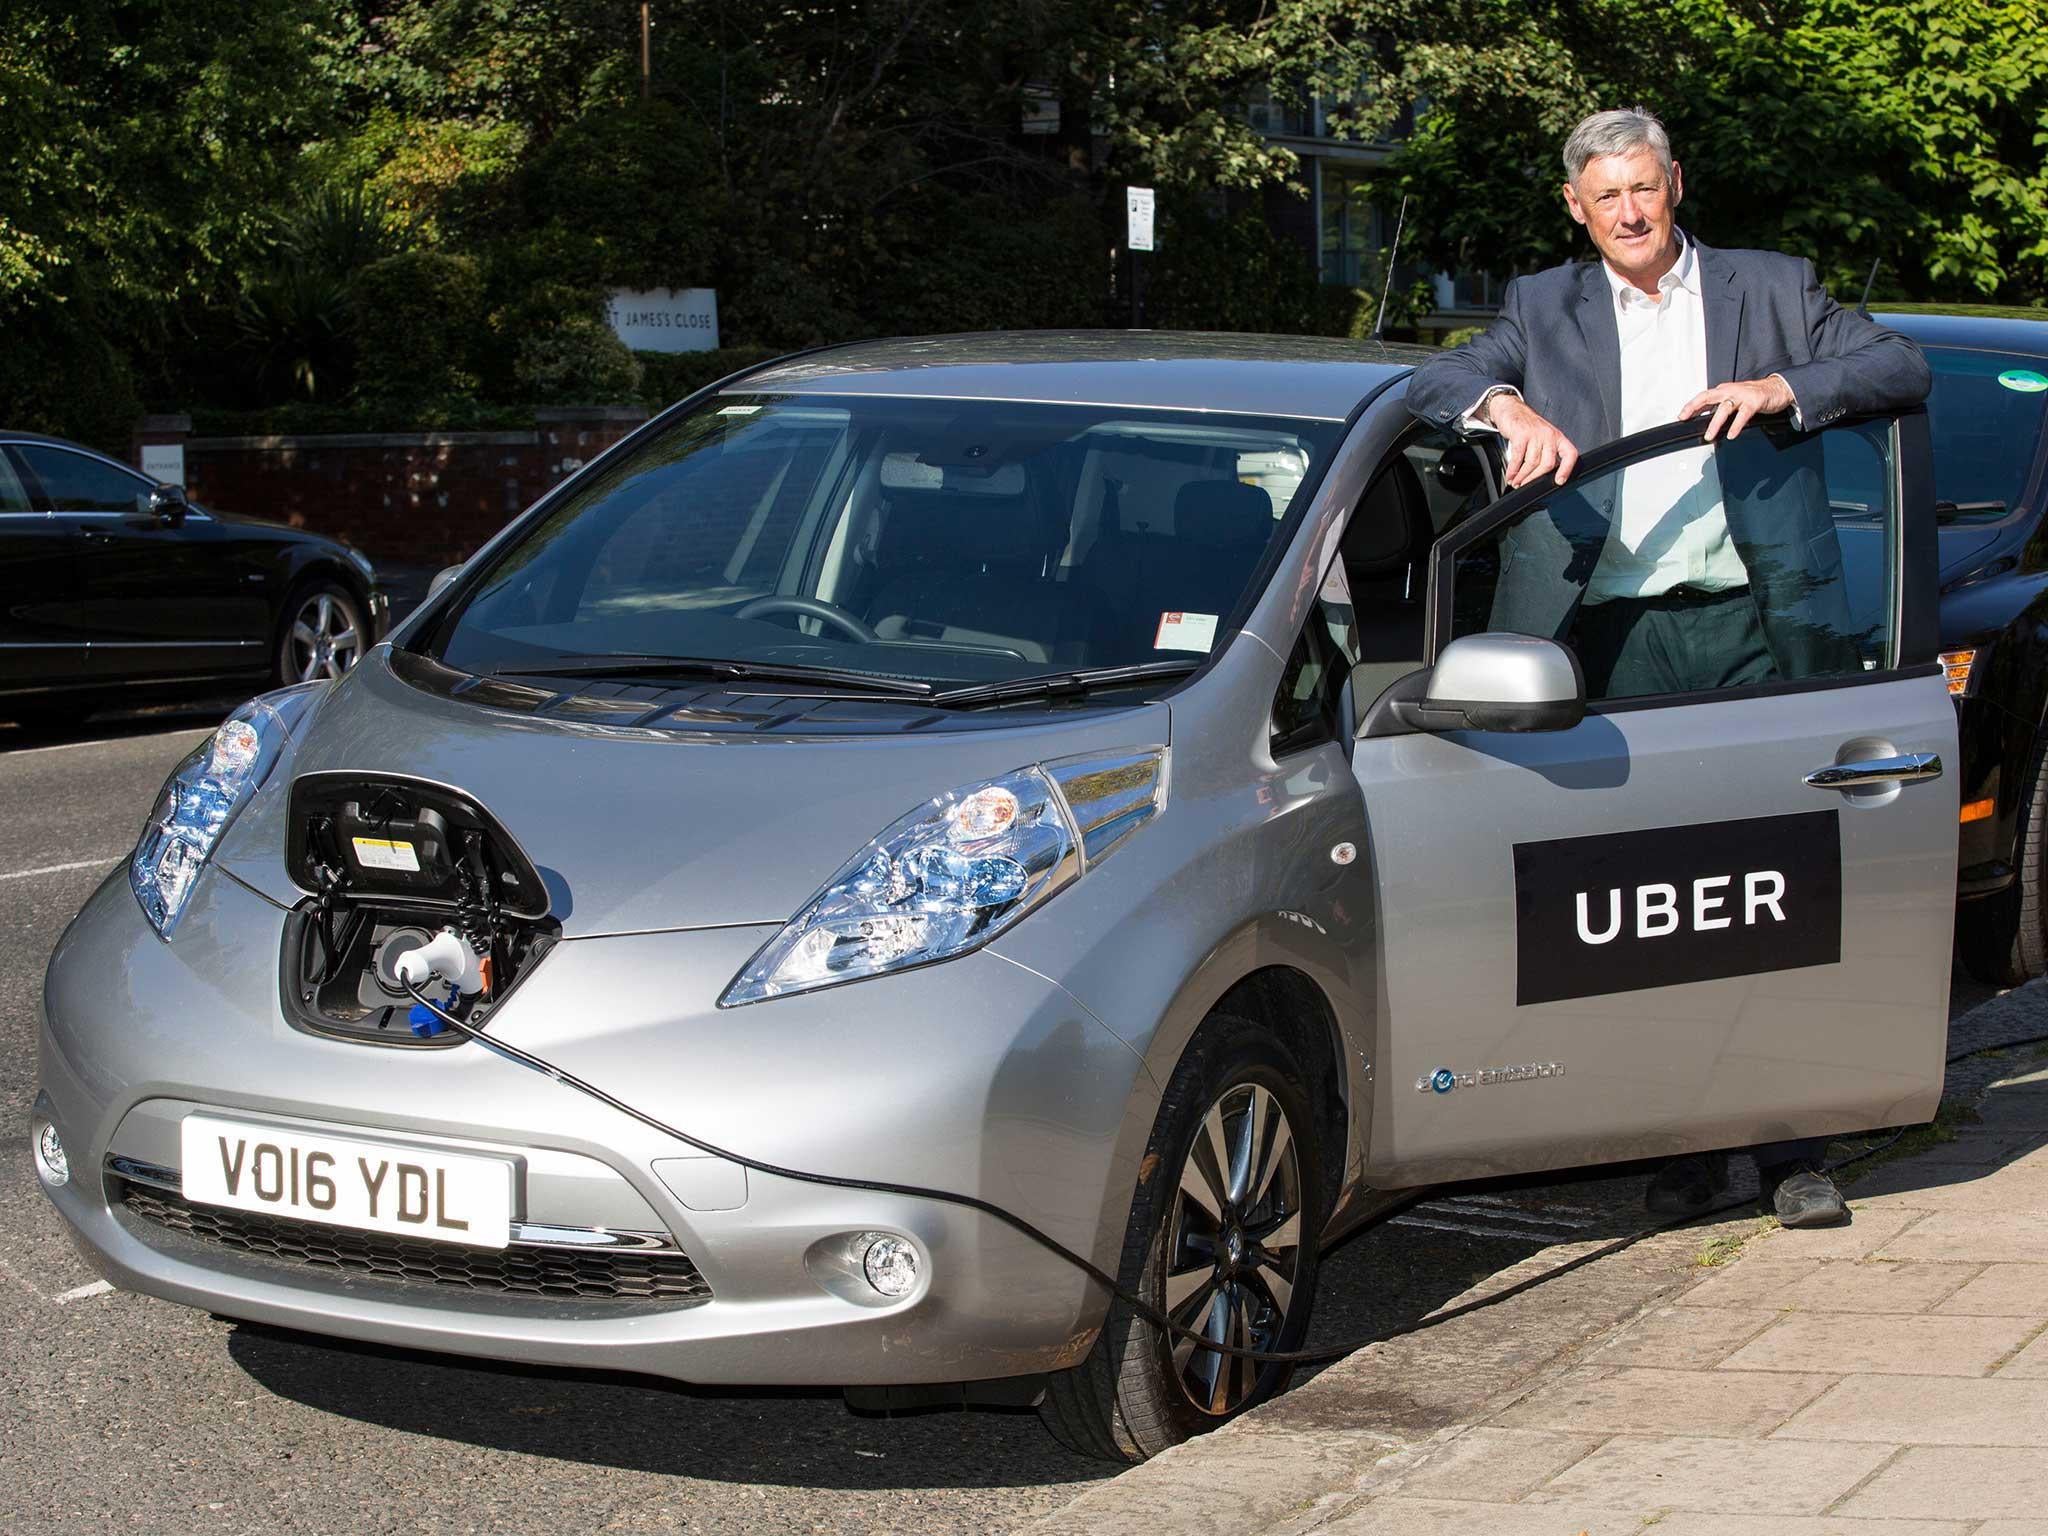 Uber introduces electric vehicles, letting people get picked up in